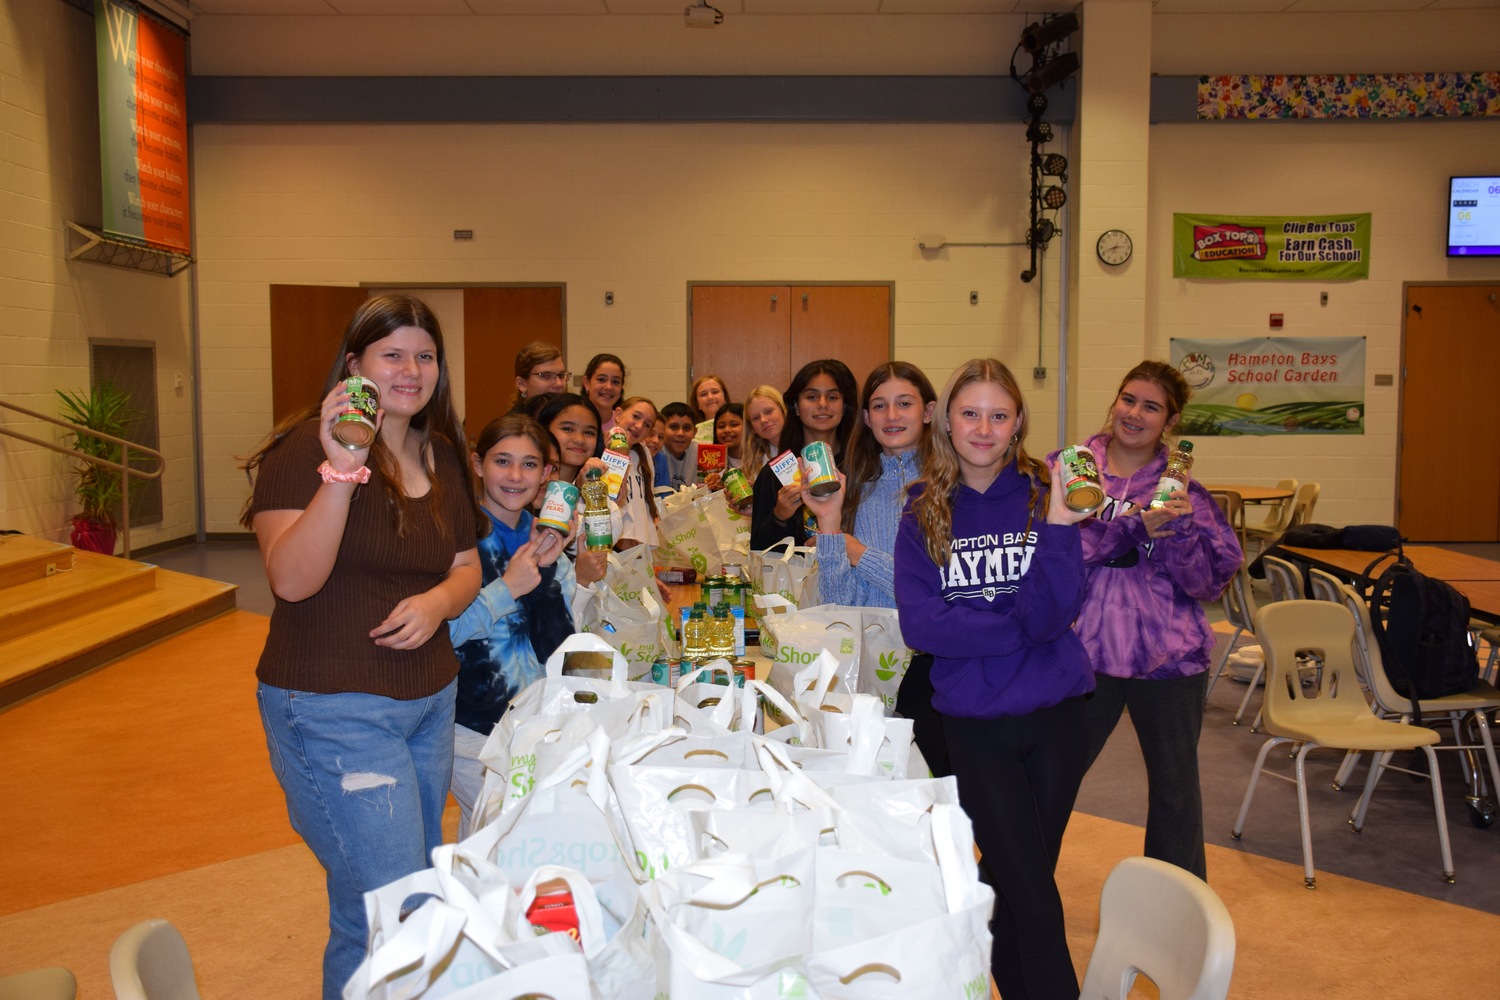 Members of the Hampton Bays Middle School OWL Club and Tri-M Music Honor Society recently volunteered their time to pack food donations as part of a partnership with Heart of the Hamptons. All of the packages will be donated to families in need within the school district. COURTESY HAMPTON BAYS SCHOOL DISTRICT